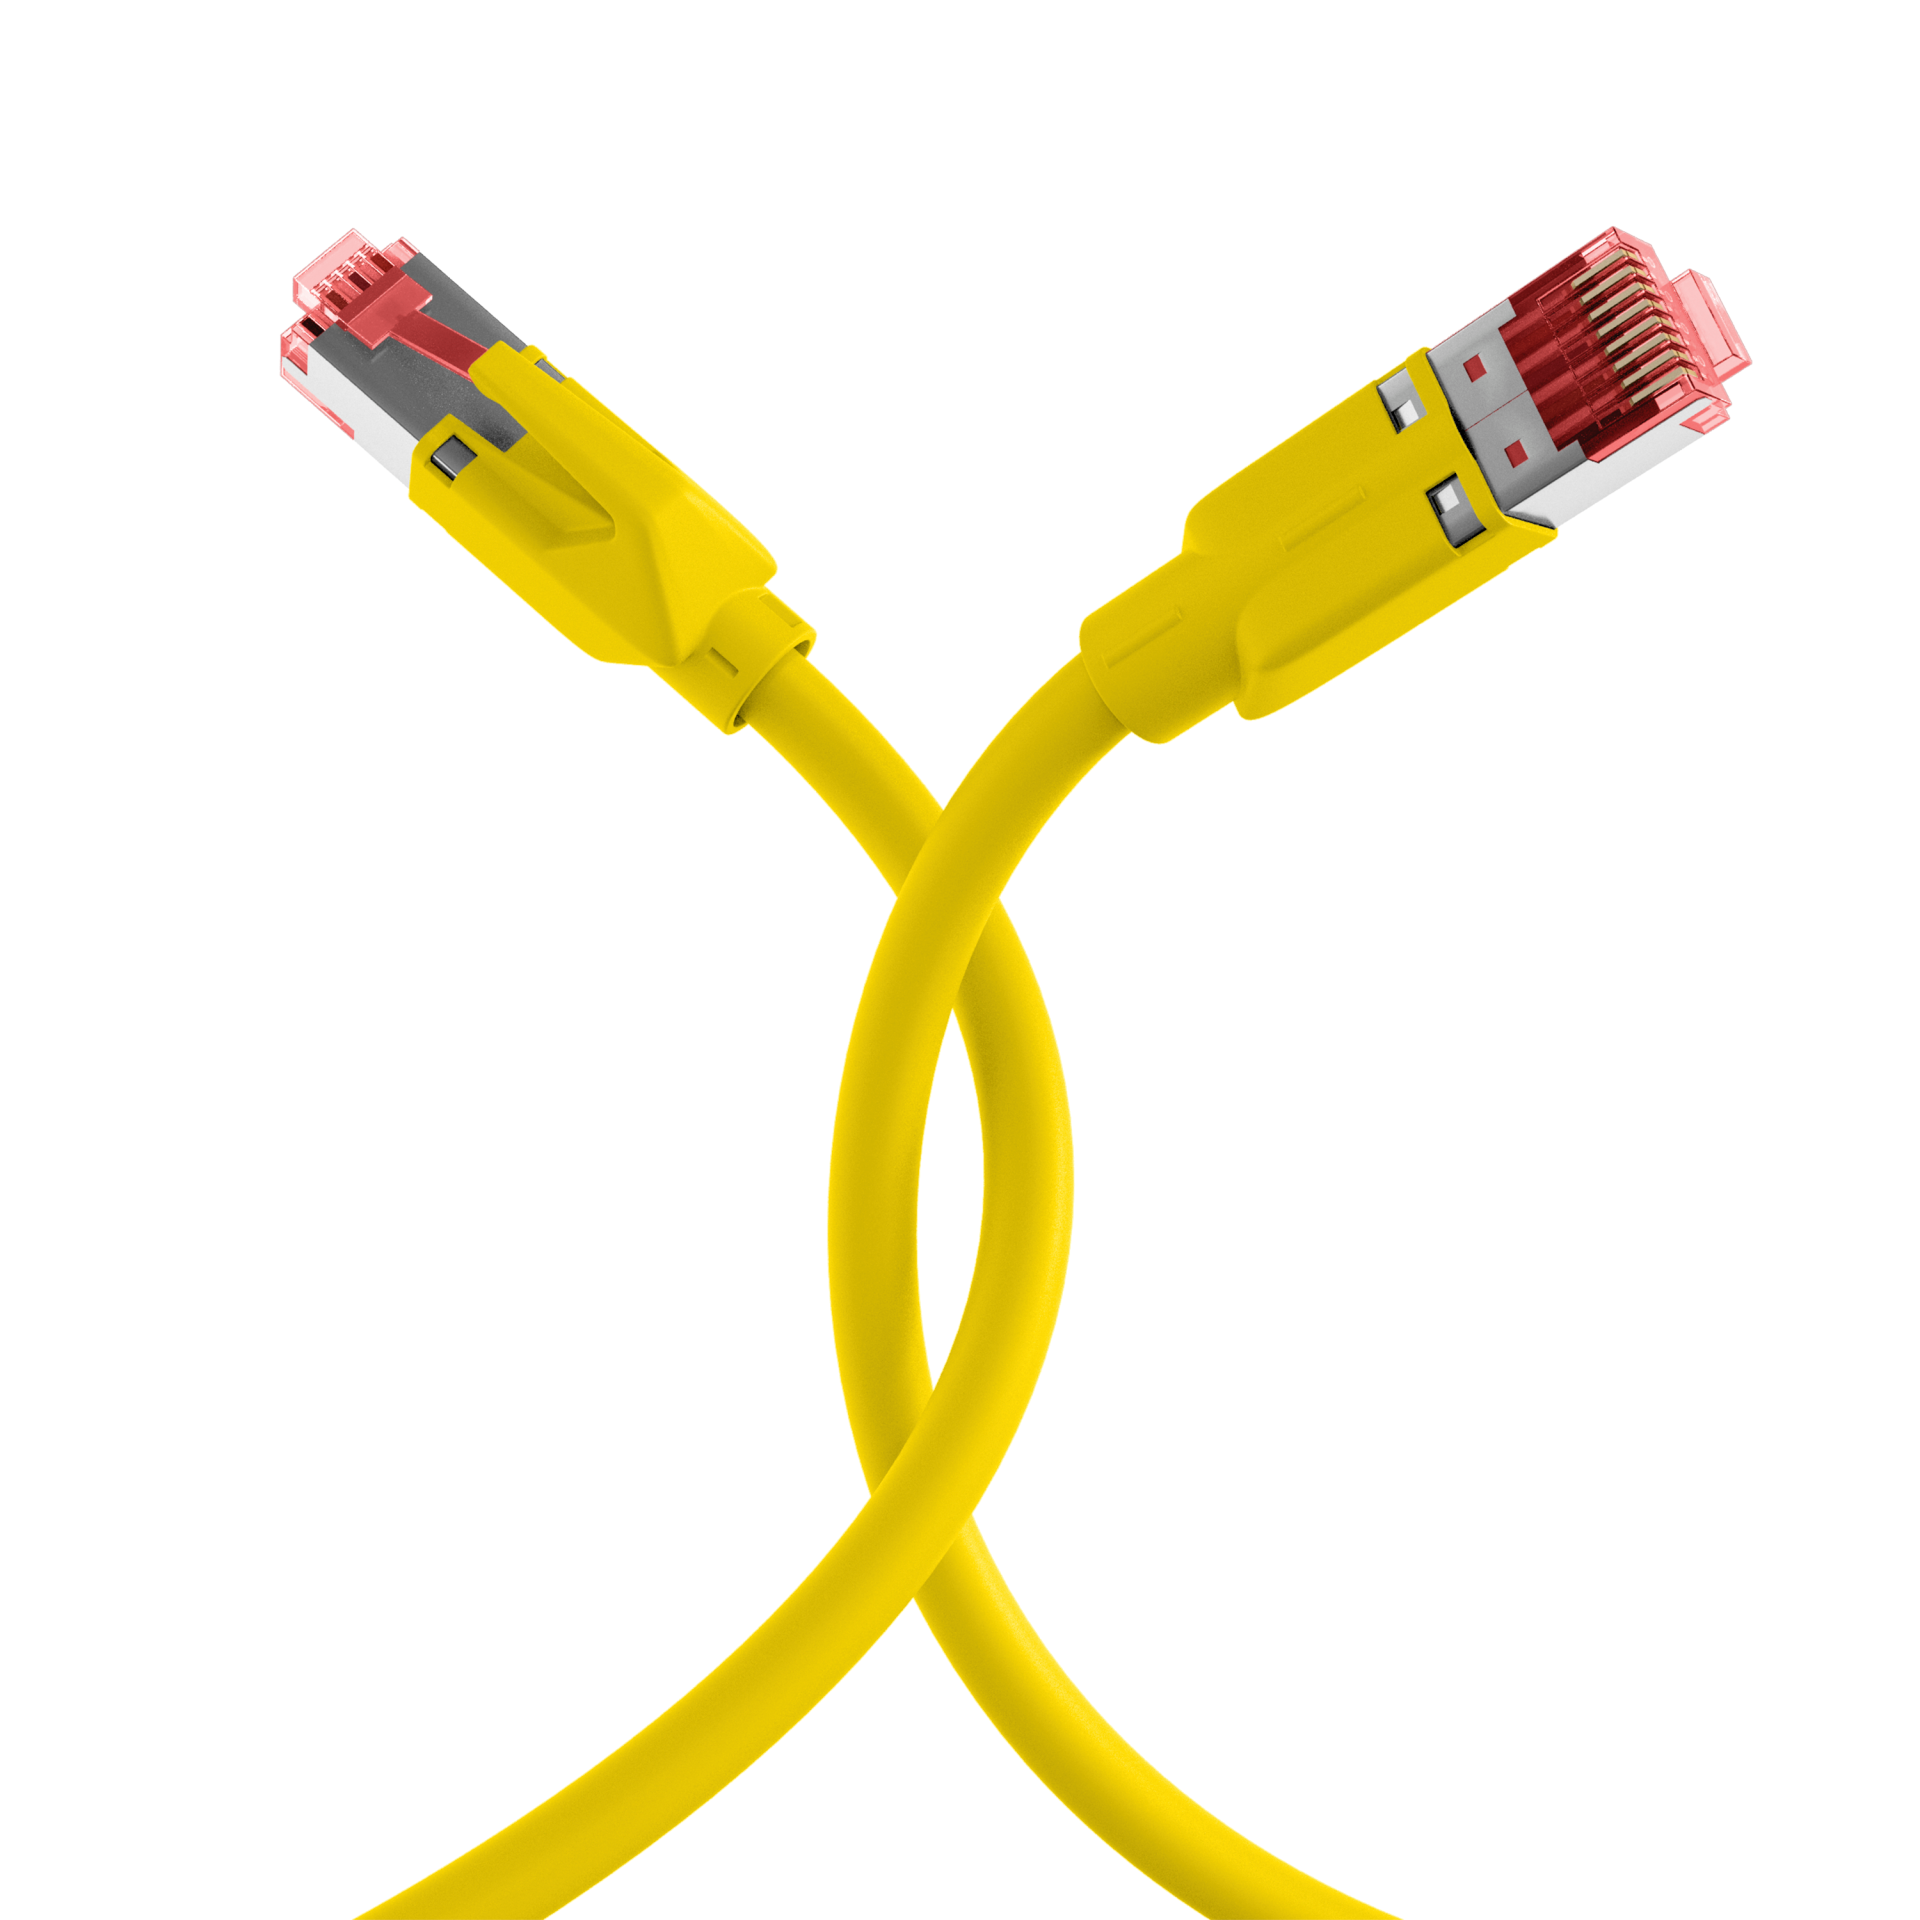 RJ45 Patch Cord Cat.5e SF/UTP PURTM21 for drag chains yellow 9m